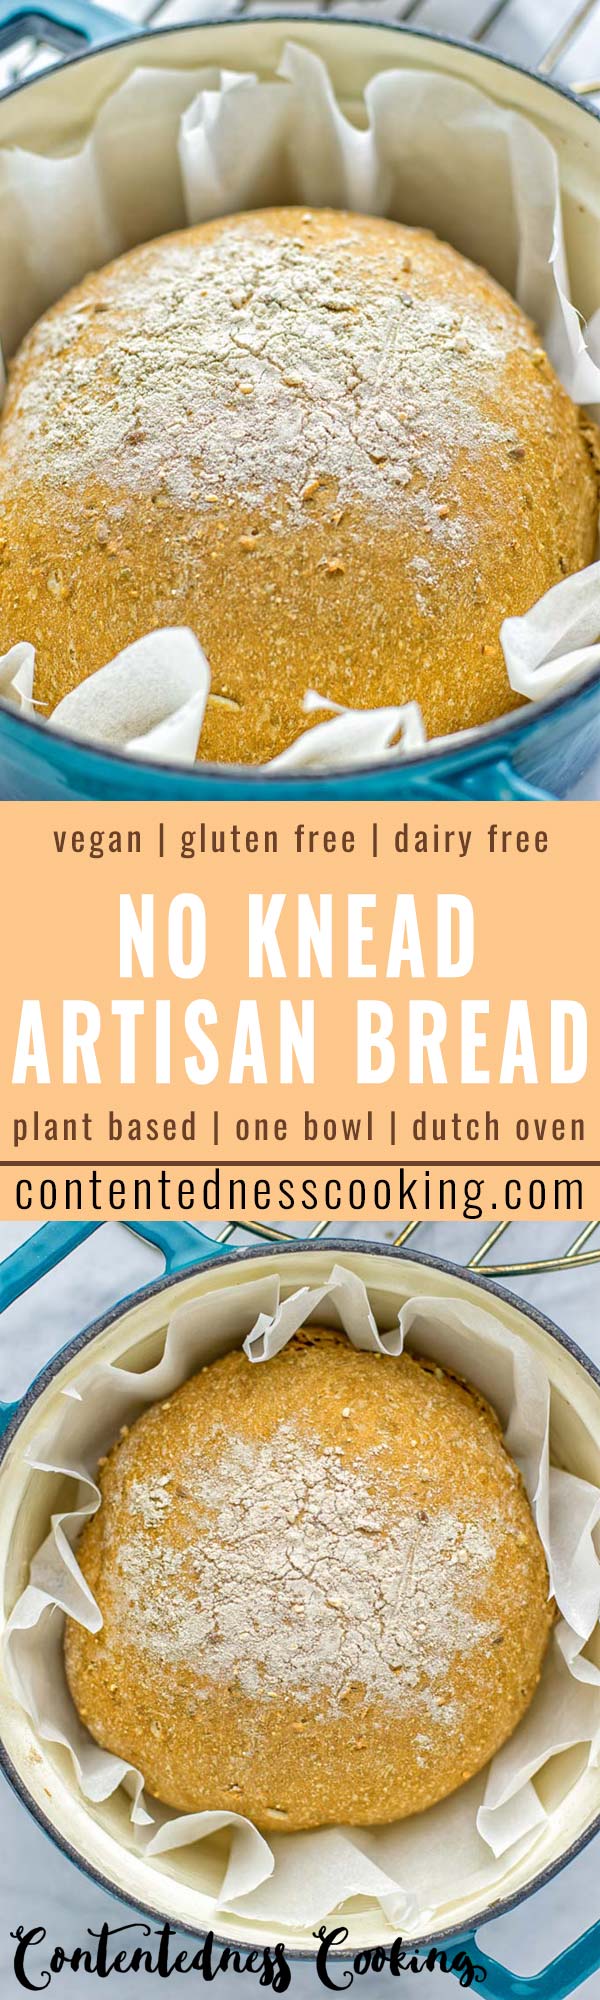 This Artisan Bread is naturally vegan, gluten free and made in the Dutch oven. It’s easy to prepare in one bowl and the result will be impressive. Trust me there is nothing better than fresh homemade bread from the oven. This is perfect for breakfast, lunch and even dinner. Try this for your family and everyone will love it. #vegan #dairyfree #glutenfree #contentednesscooking #breakfast #dinner #lunch #artisanbread #nokneadbread #dutchovenbread #homemadebread #kidfriendlymeals #budgetmeals 